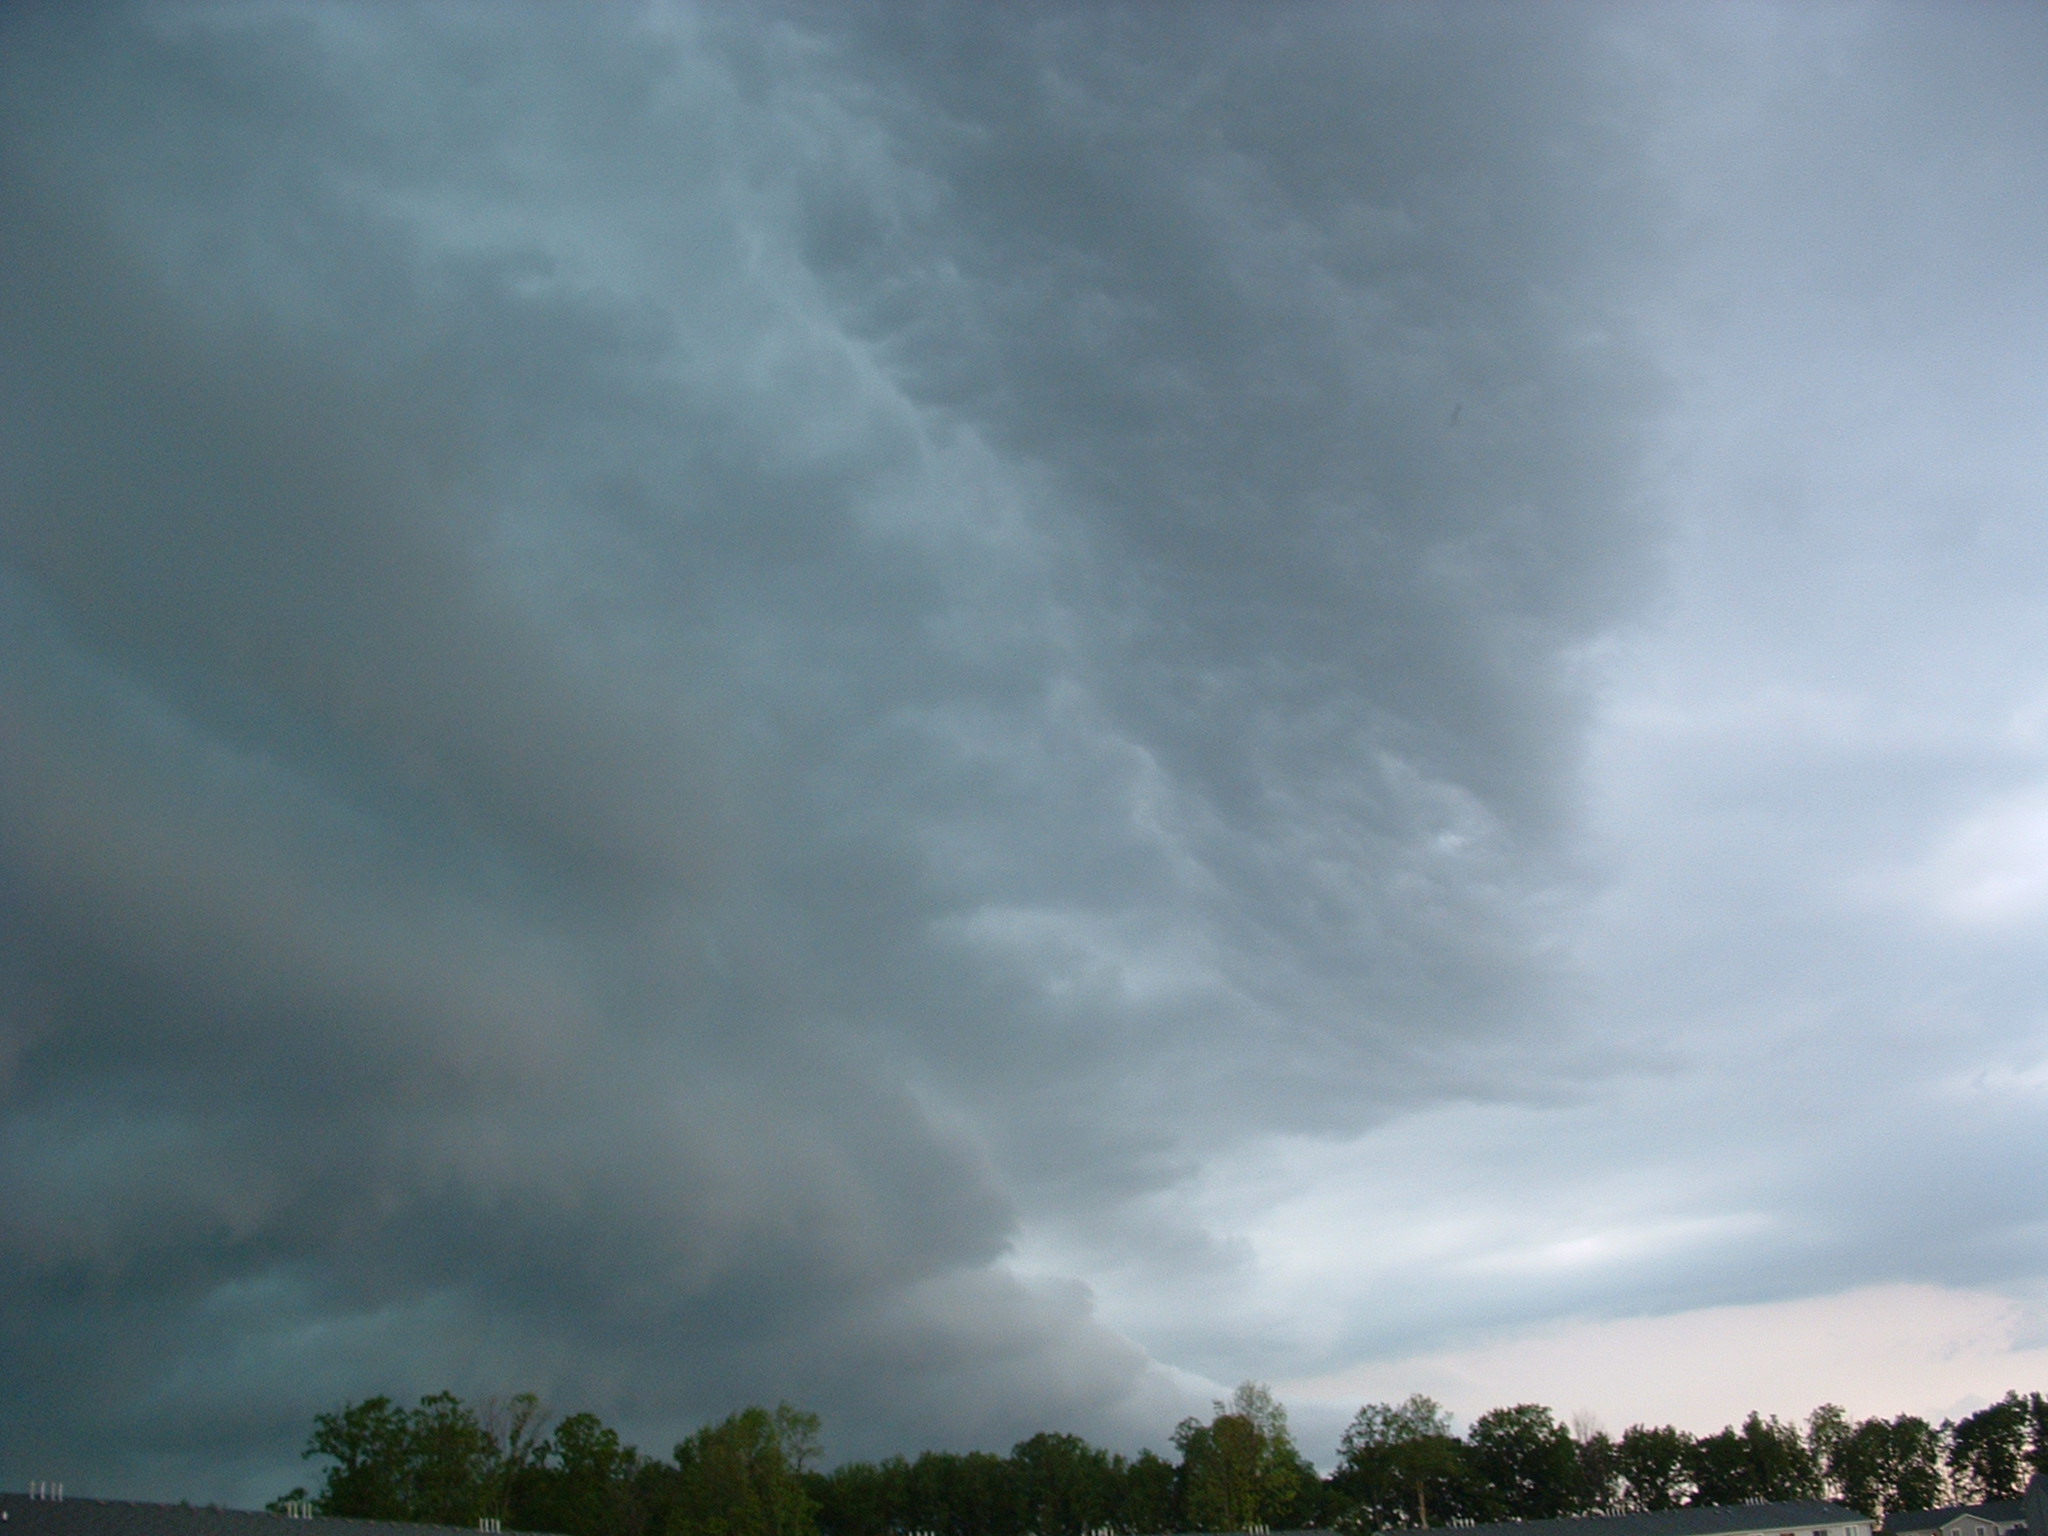 Shelf cloud movements as a weather front moves overhead caught by stop motion photography.